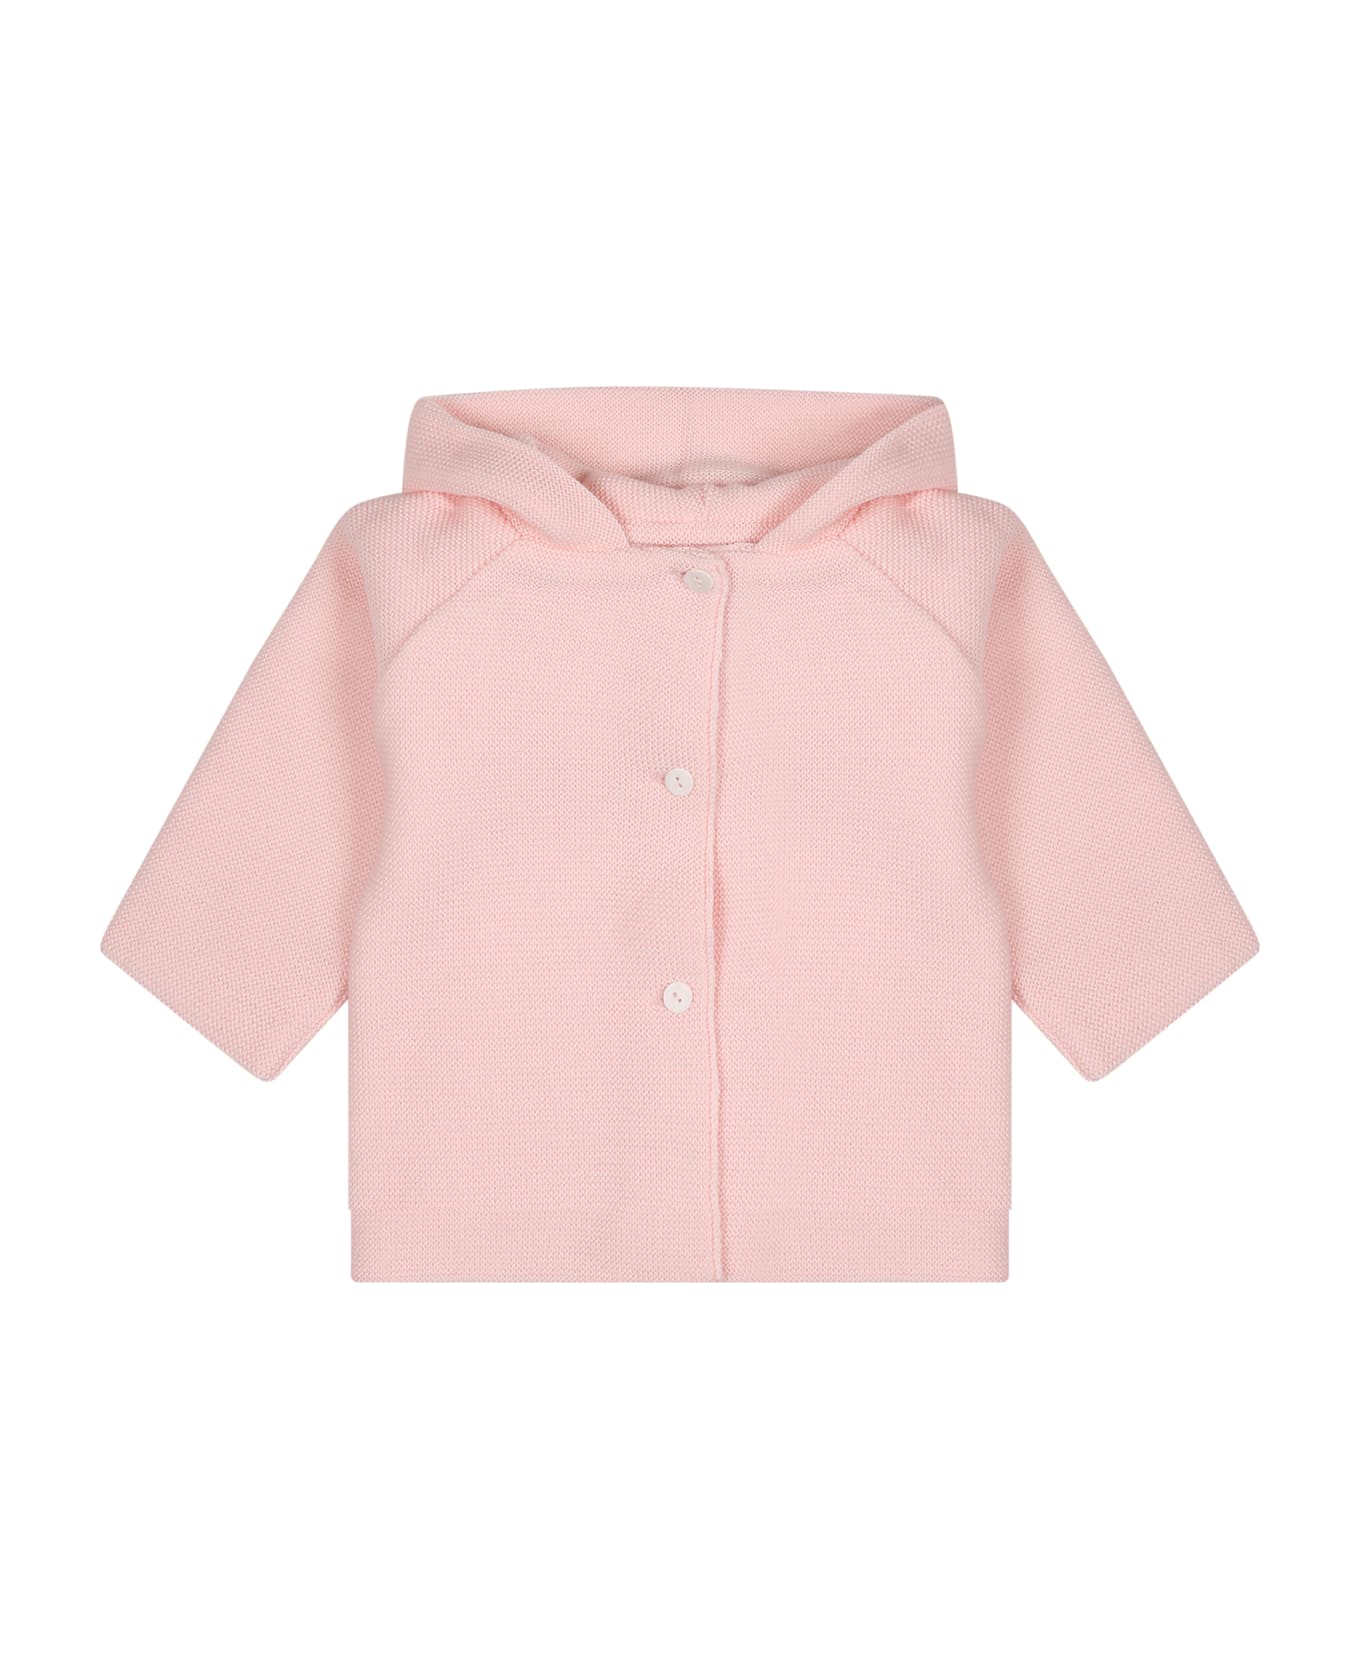 Little Bear Pink Coat For Baby Girl - Pink